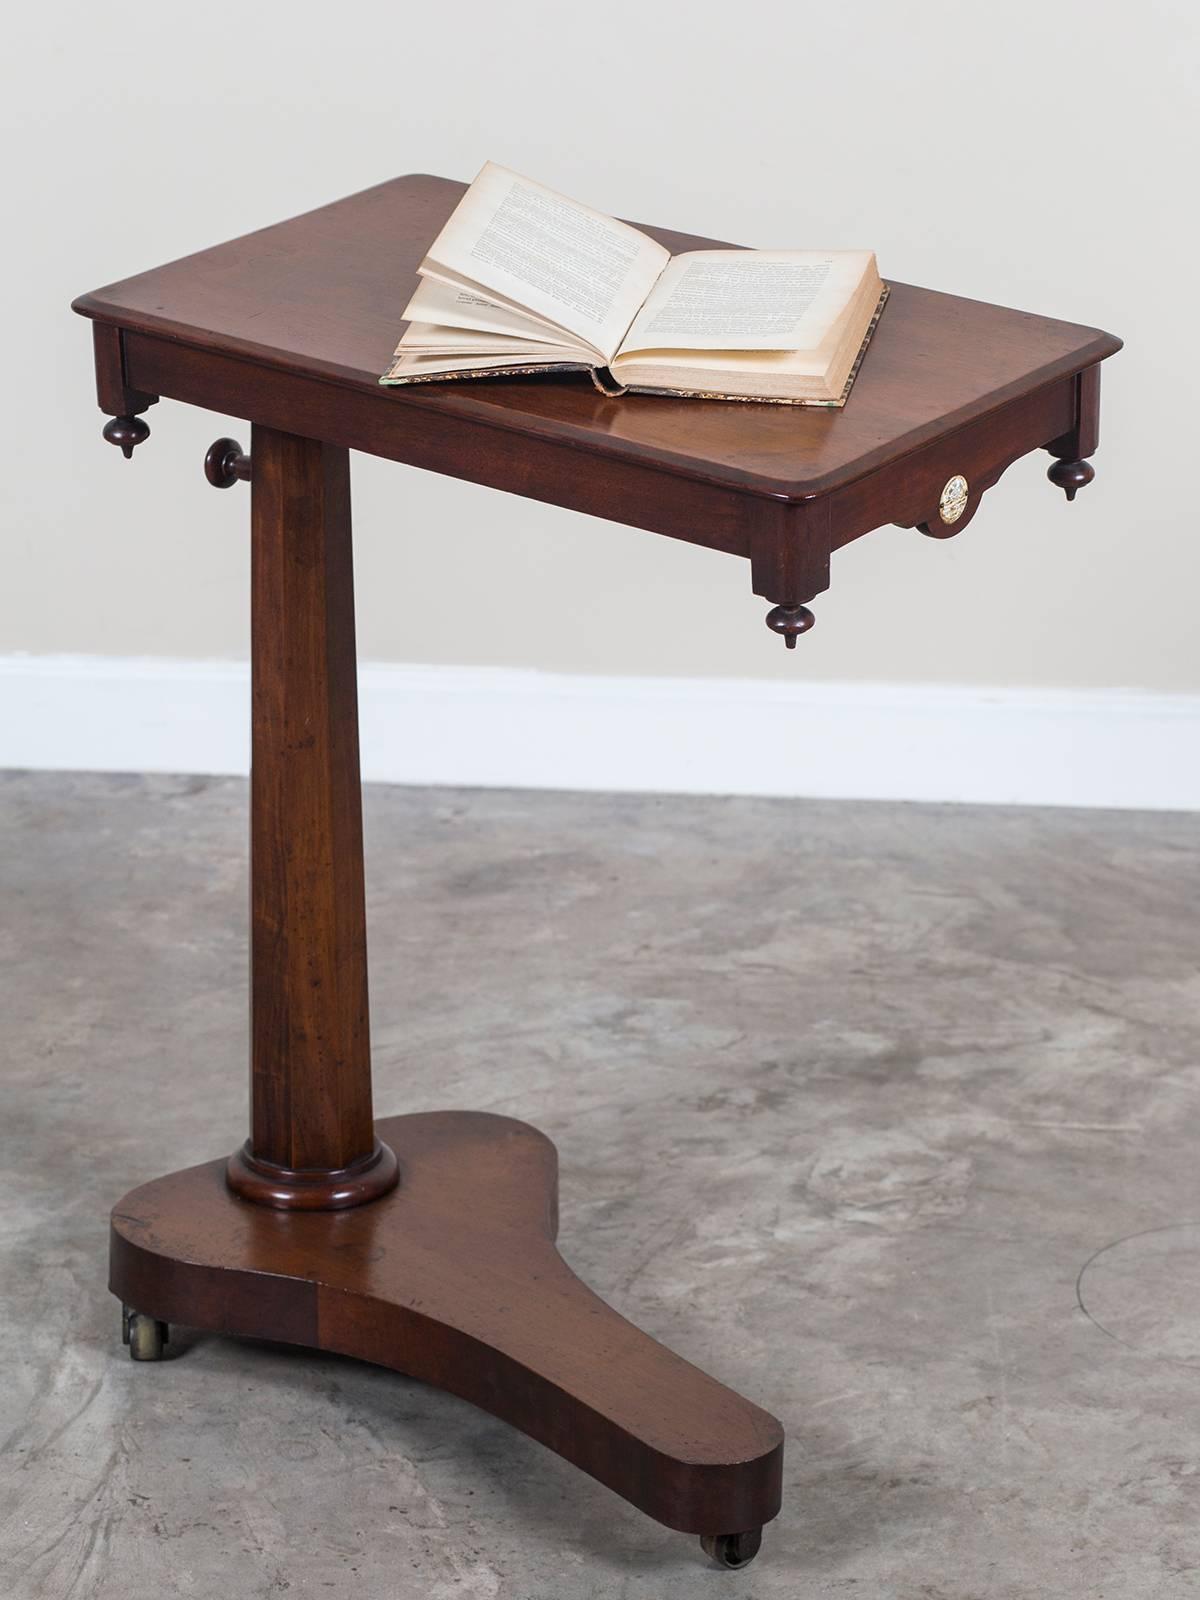 Receive our new selections direct from 1stdibs by email each week. Please click follow dealer below and see them first!

Designed and manufactured by Robinson and Sons of Ilkley in Yorkshire this handsome antique English mahogany tilt top reading